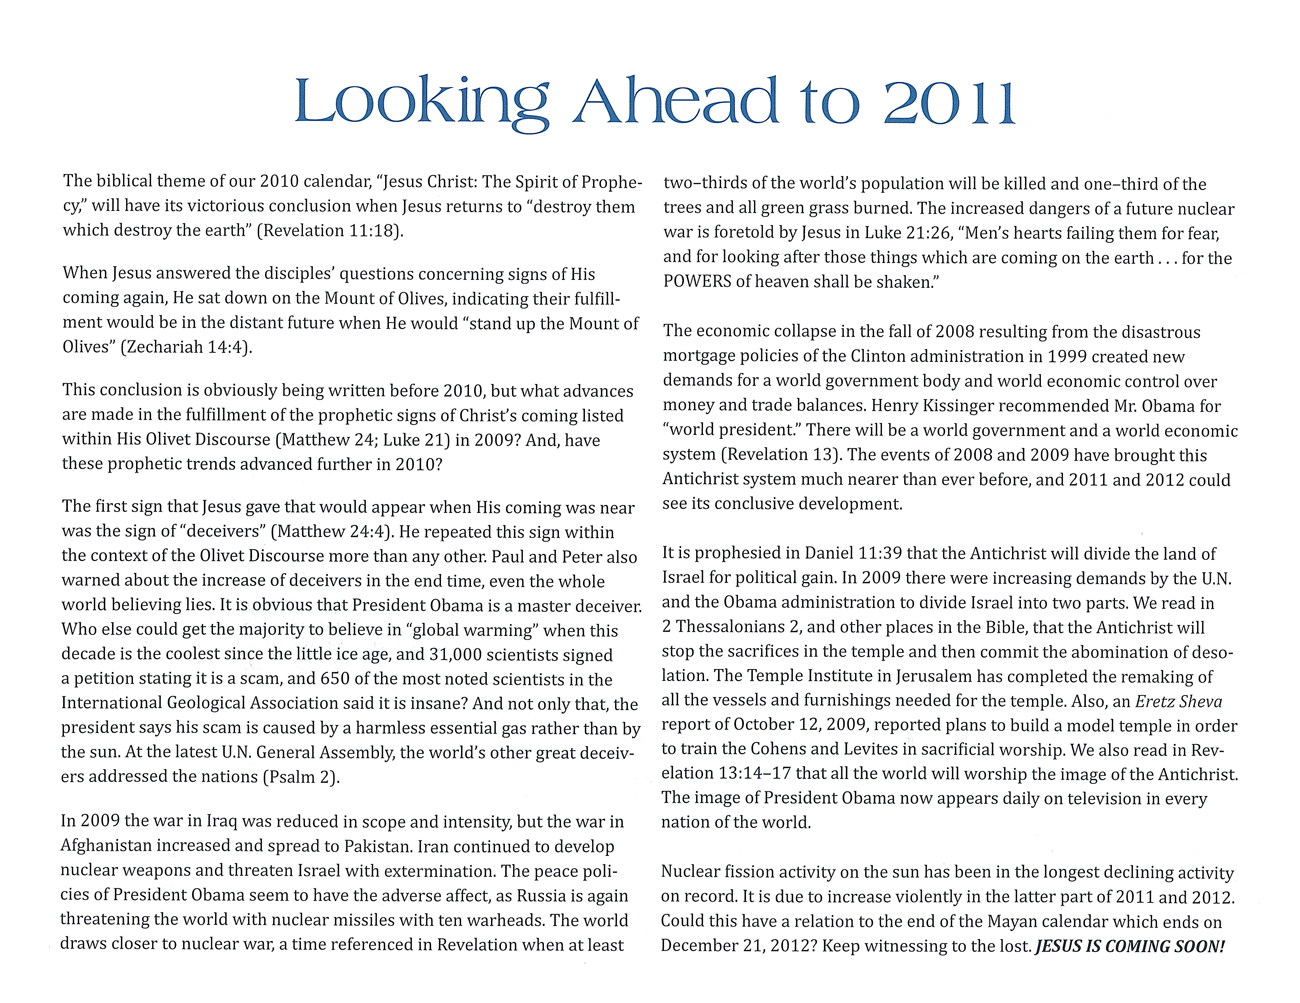 2010 Prophecy Calendar: Looking Ahead to 2011